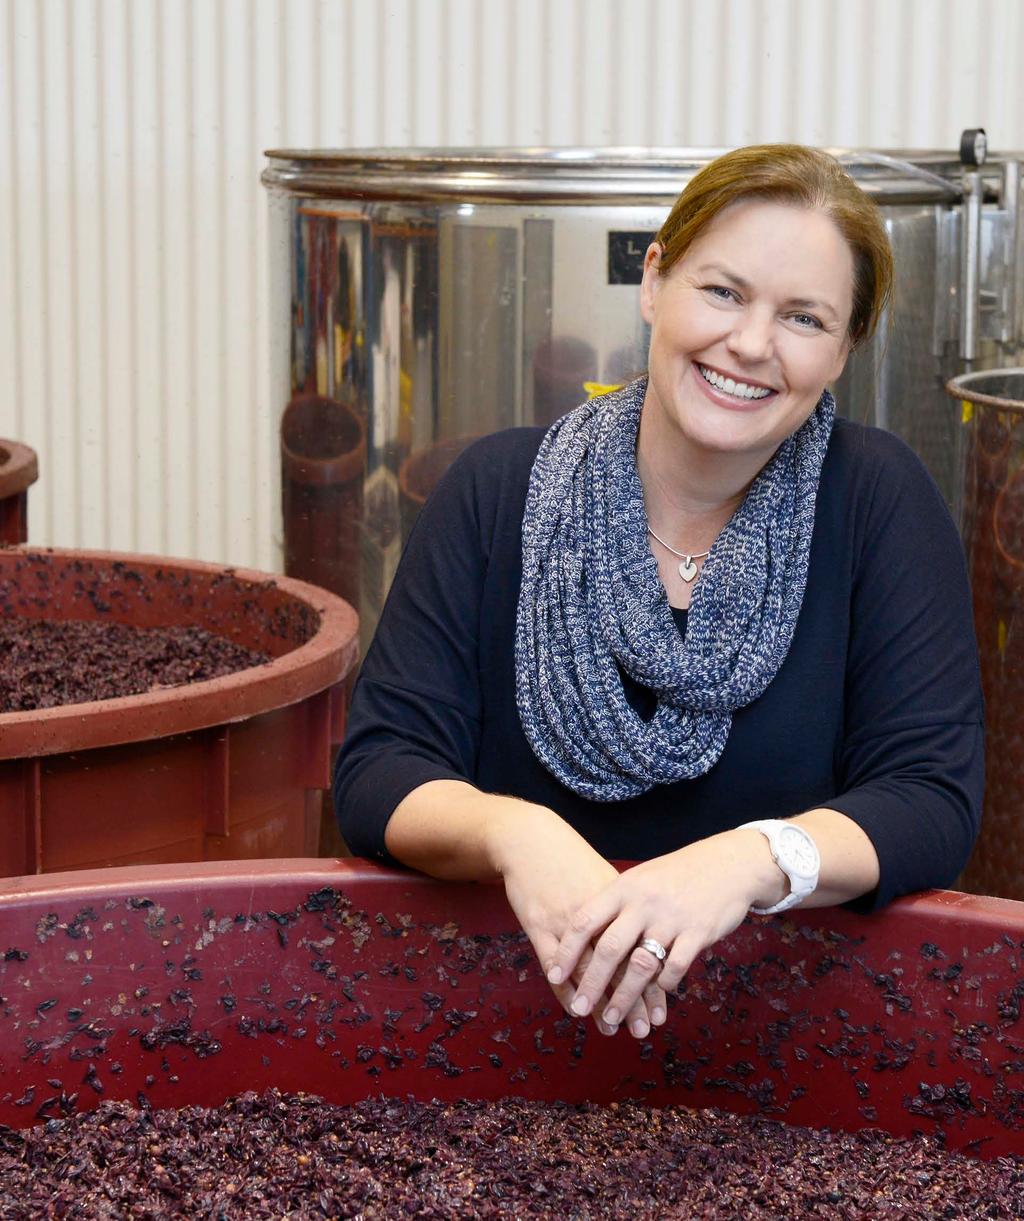 WINEMAKER Briony Hoare Briony Hoare s interest in wine was sparked at just 15 years old when she first visited a winery.